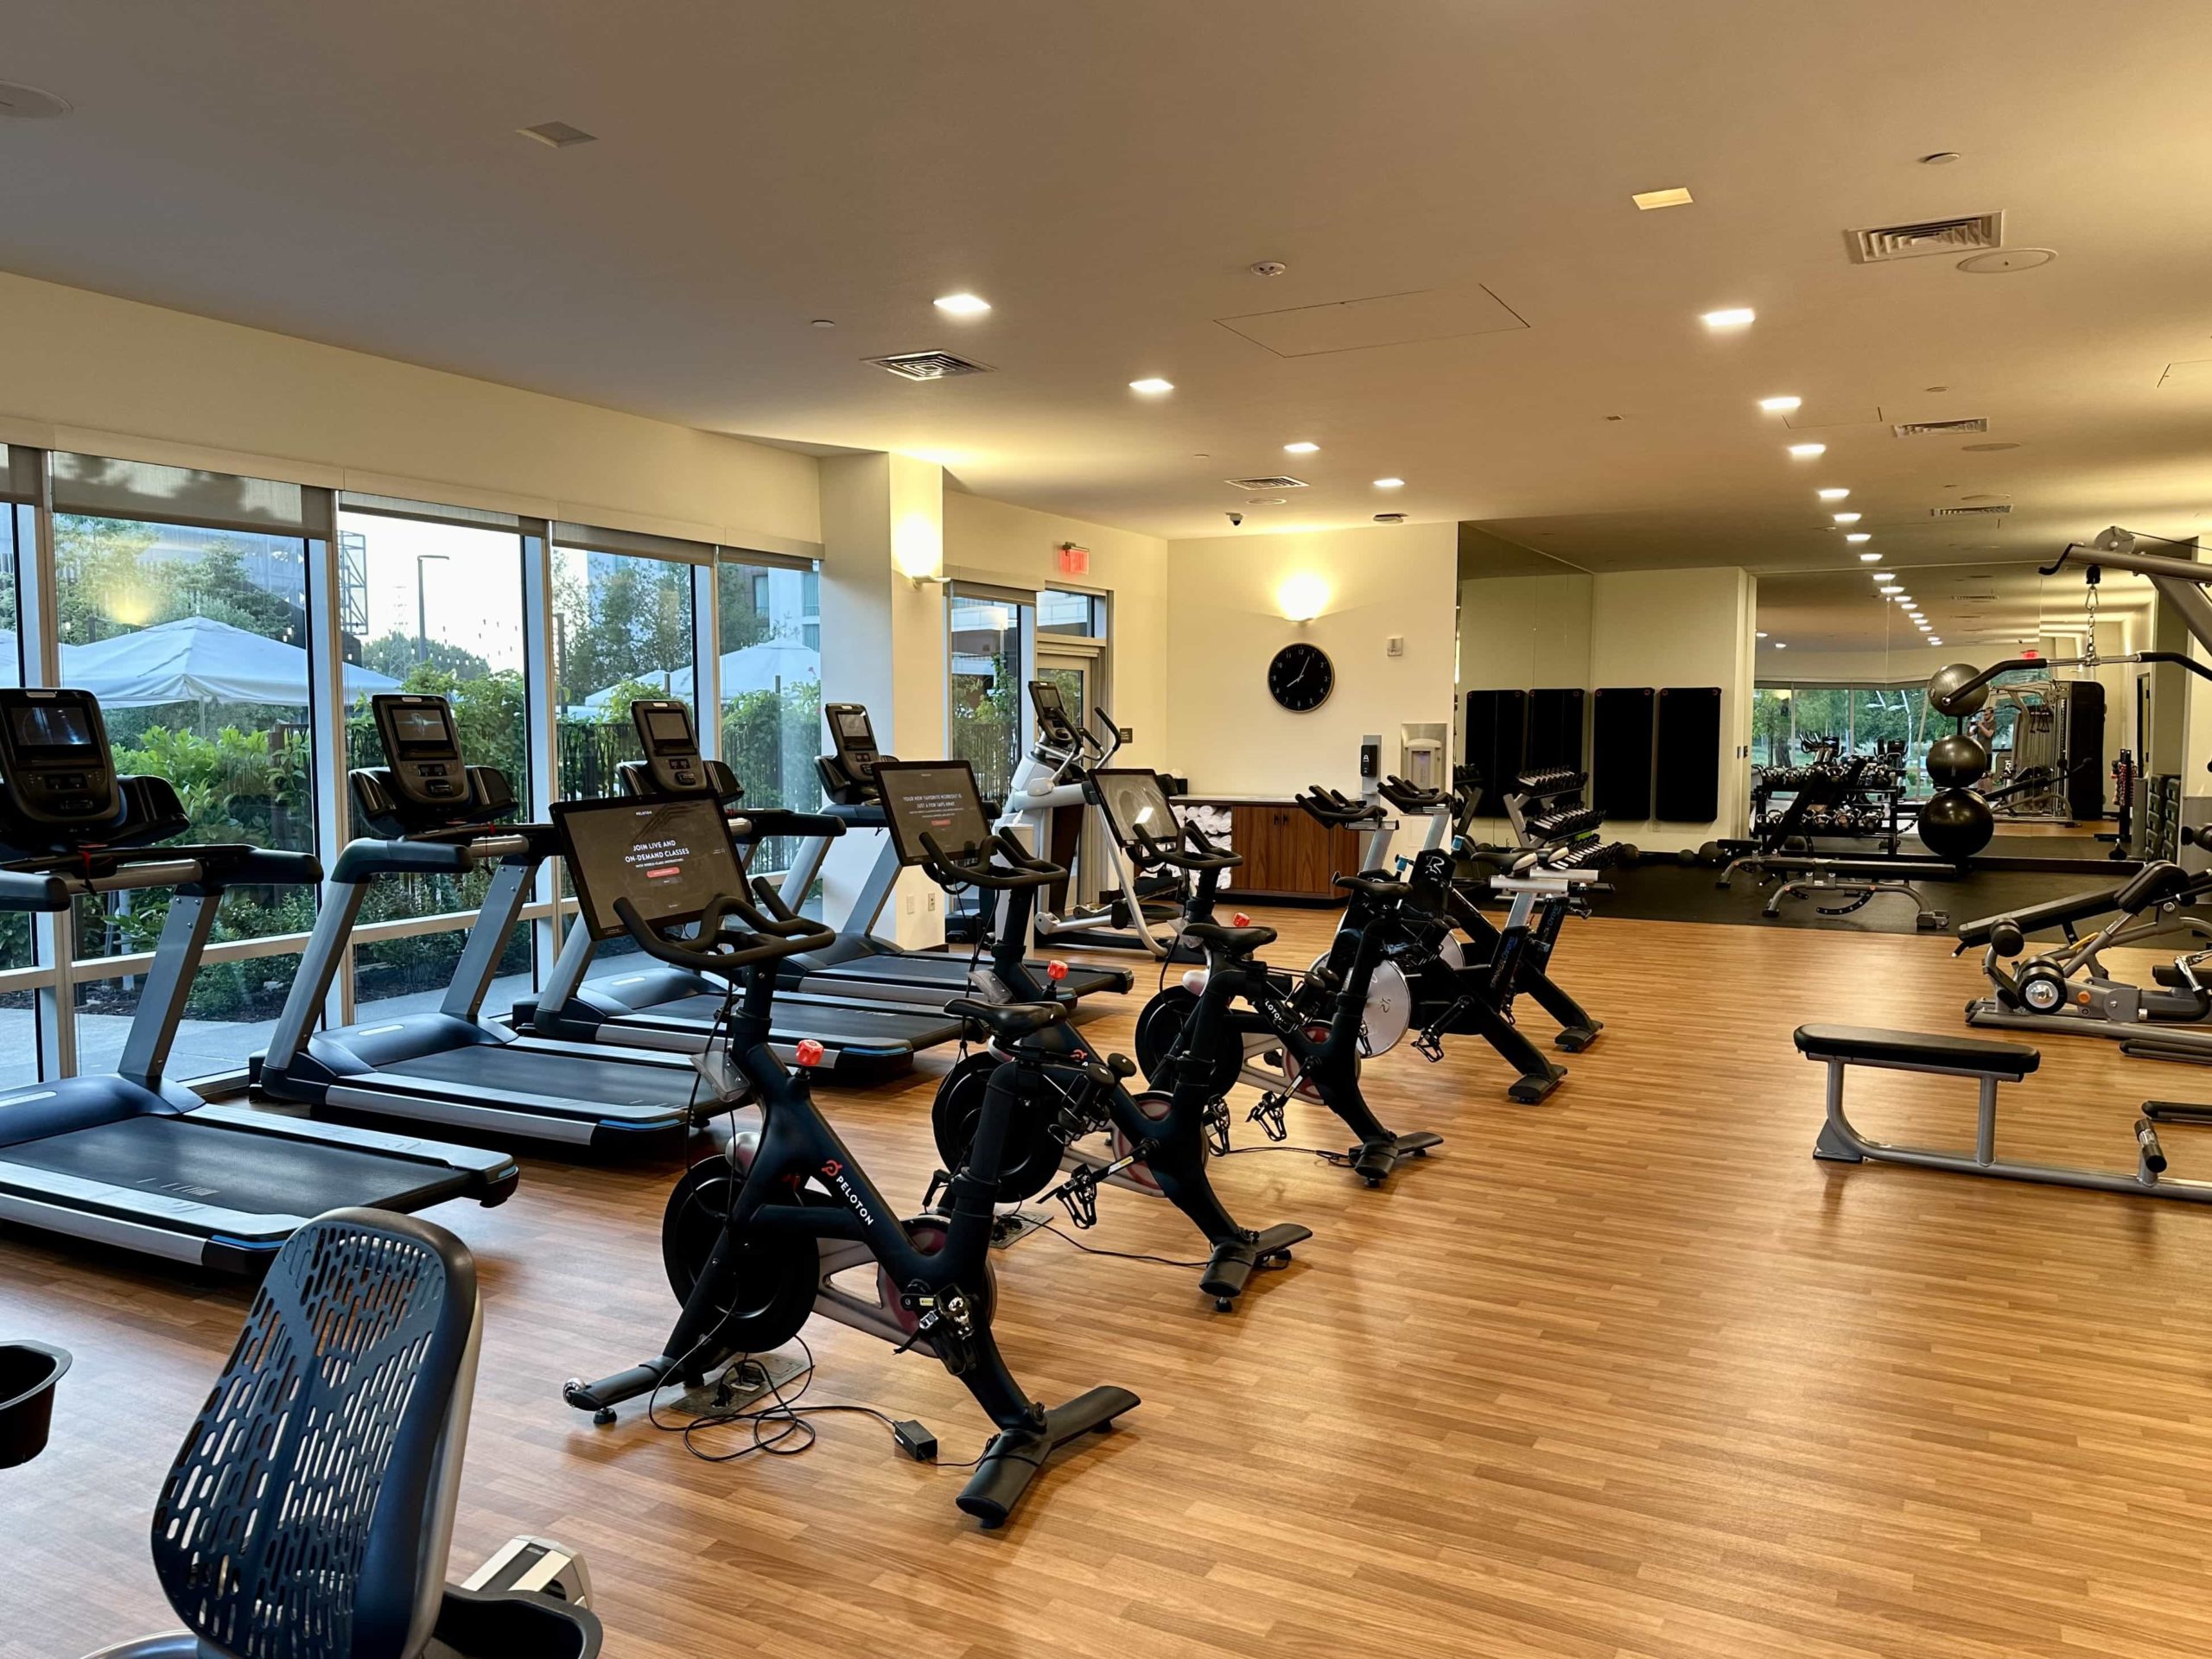 Peloton bikes, treadmills, and weight training equipment within a fitness centre